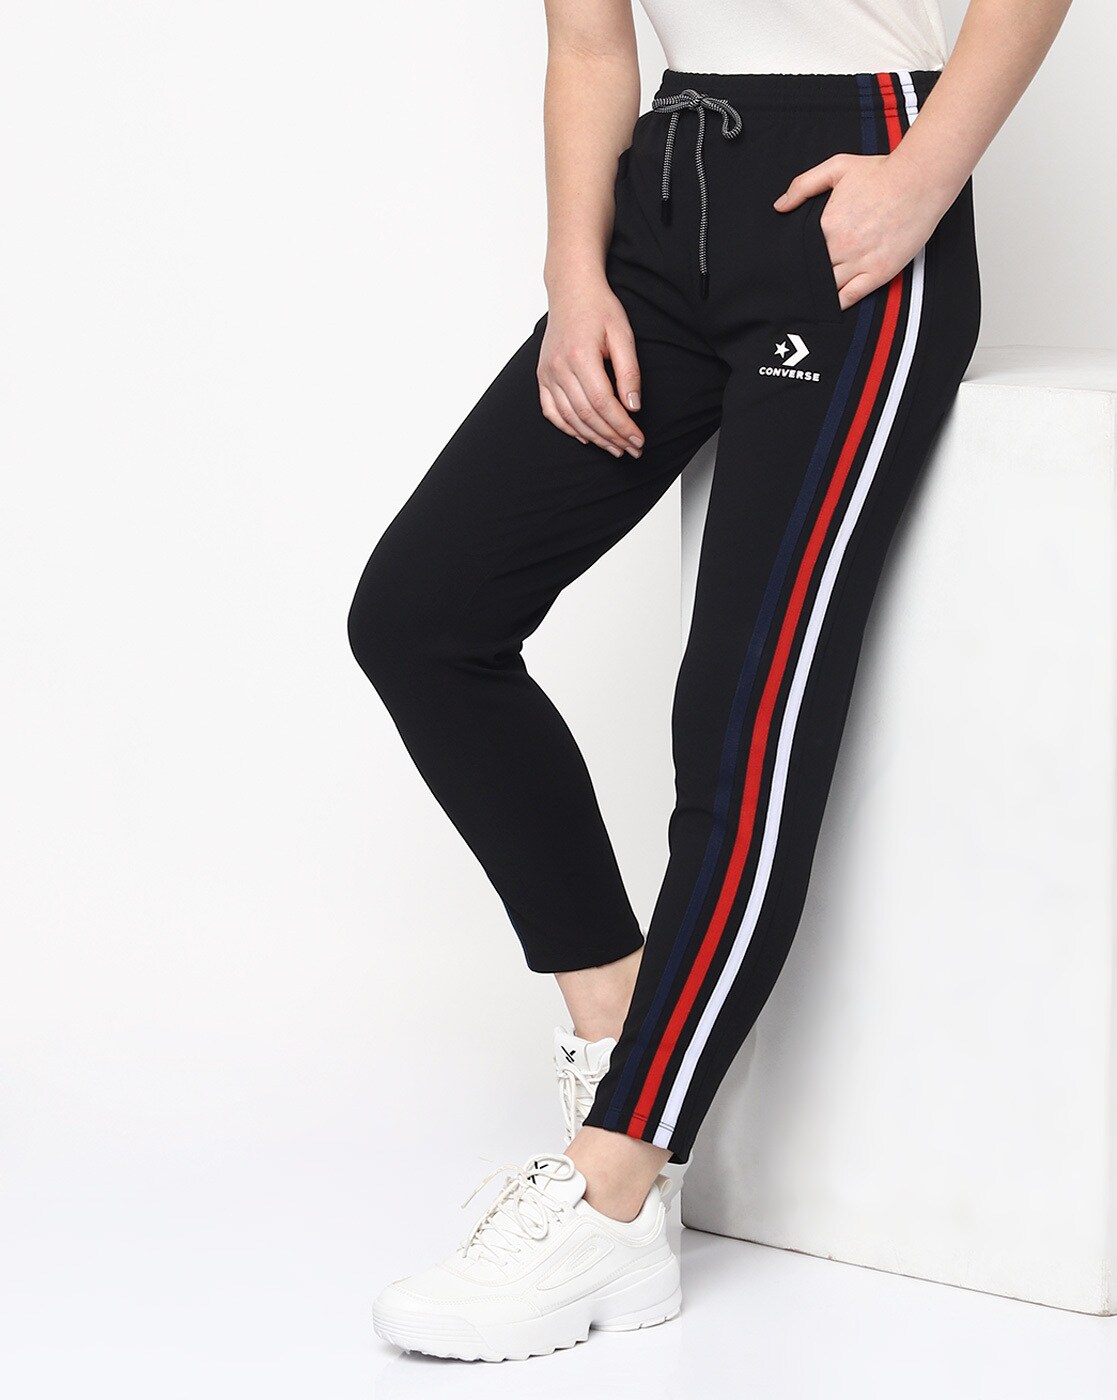 Converse Printed Men Black Track Pants  Buy Converse Printed Men Black Track  Pants Online at Best Prices in India  Shopsyin